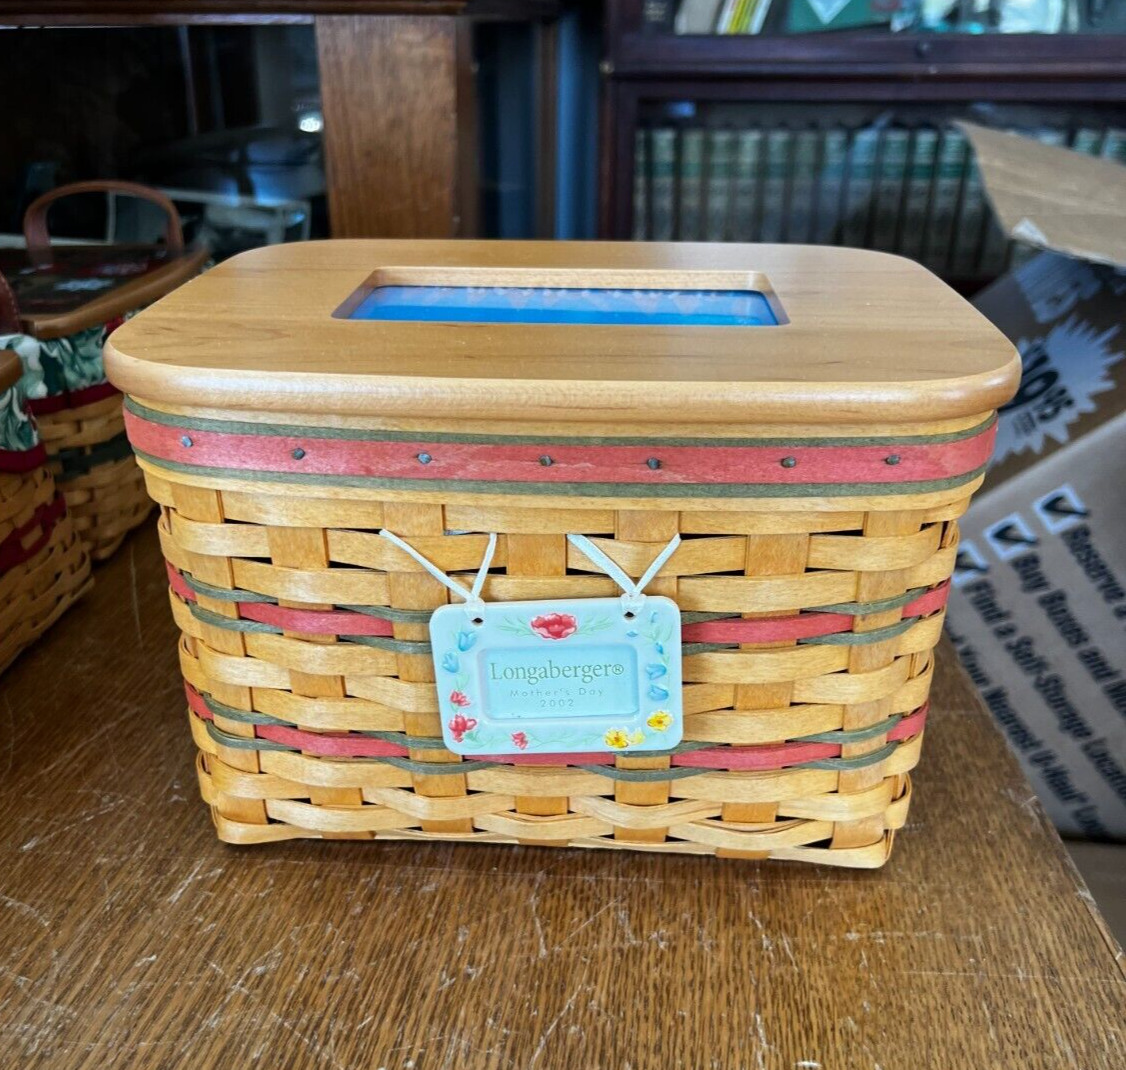 Longaberger Mother's Day 2002 Basket with Picture Frame Lid